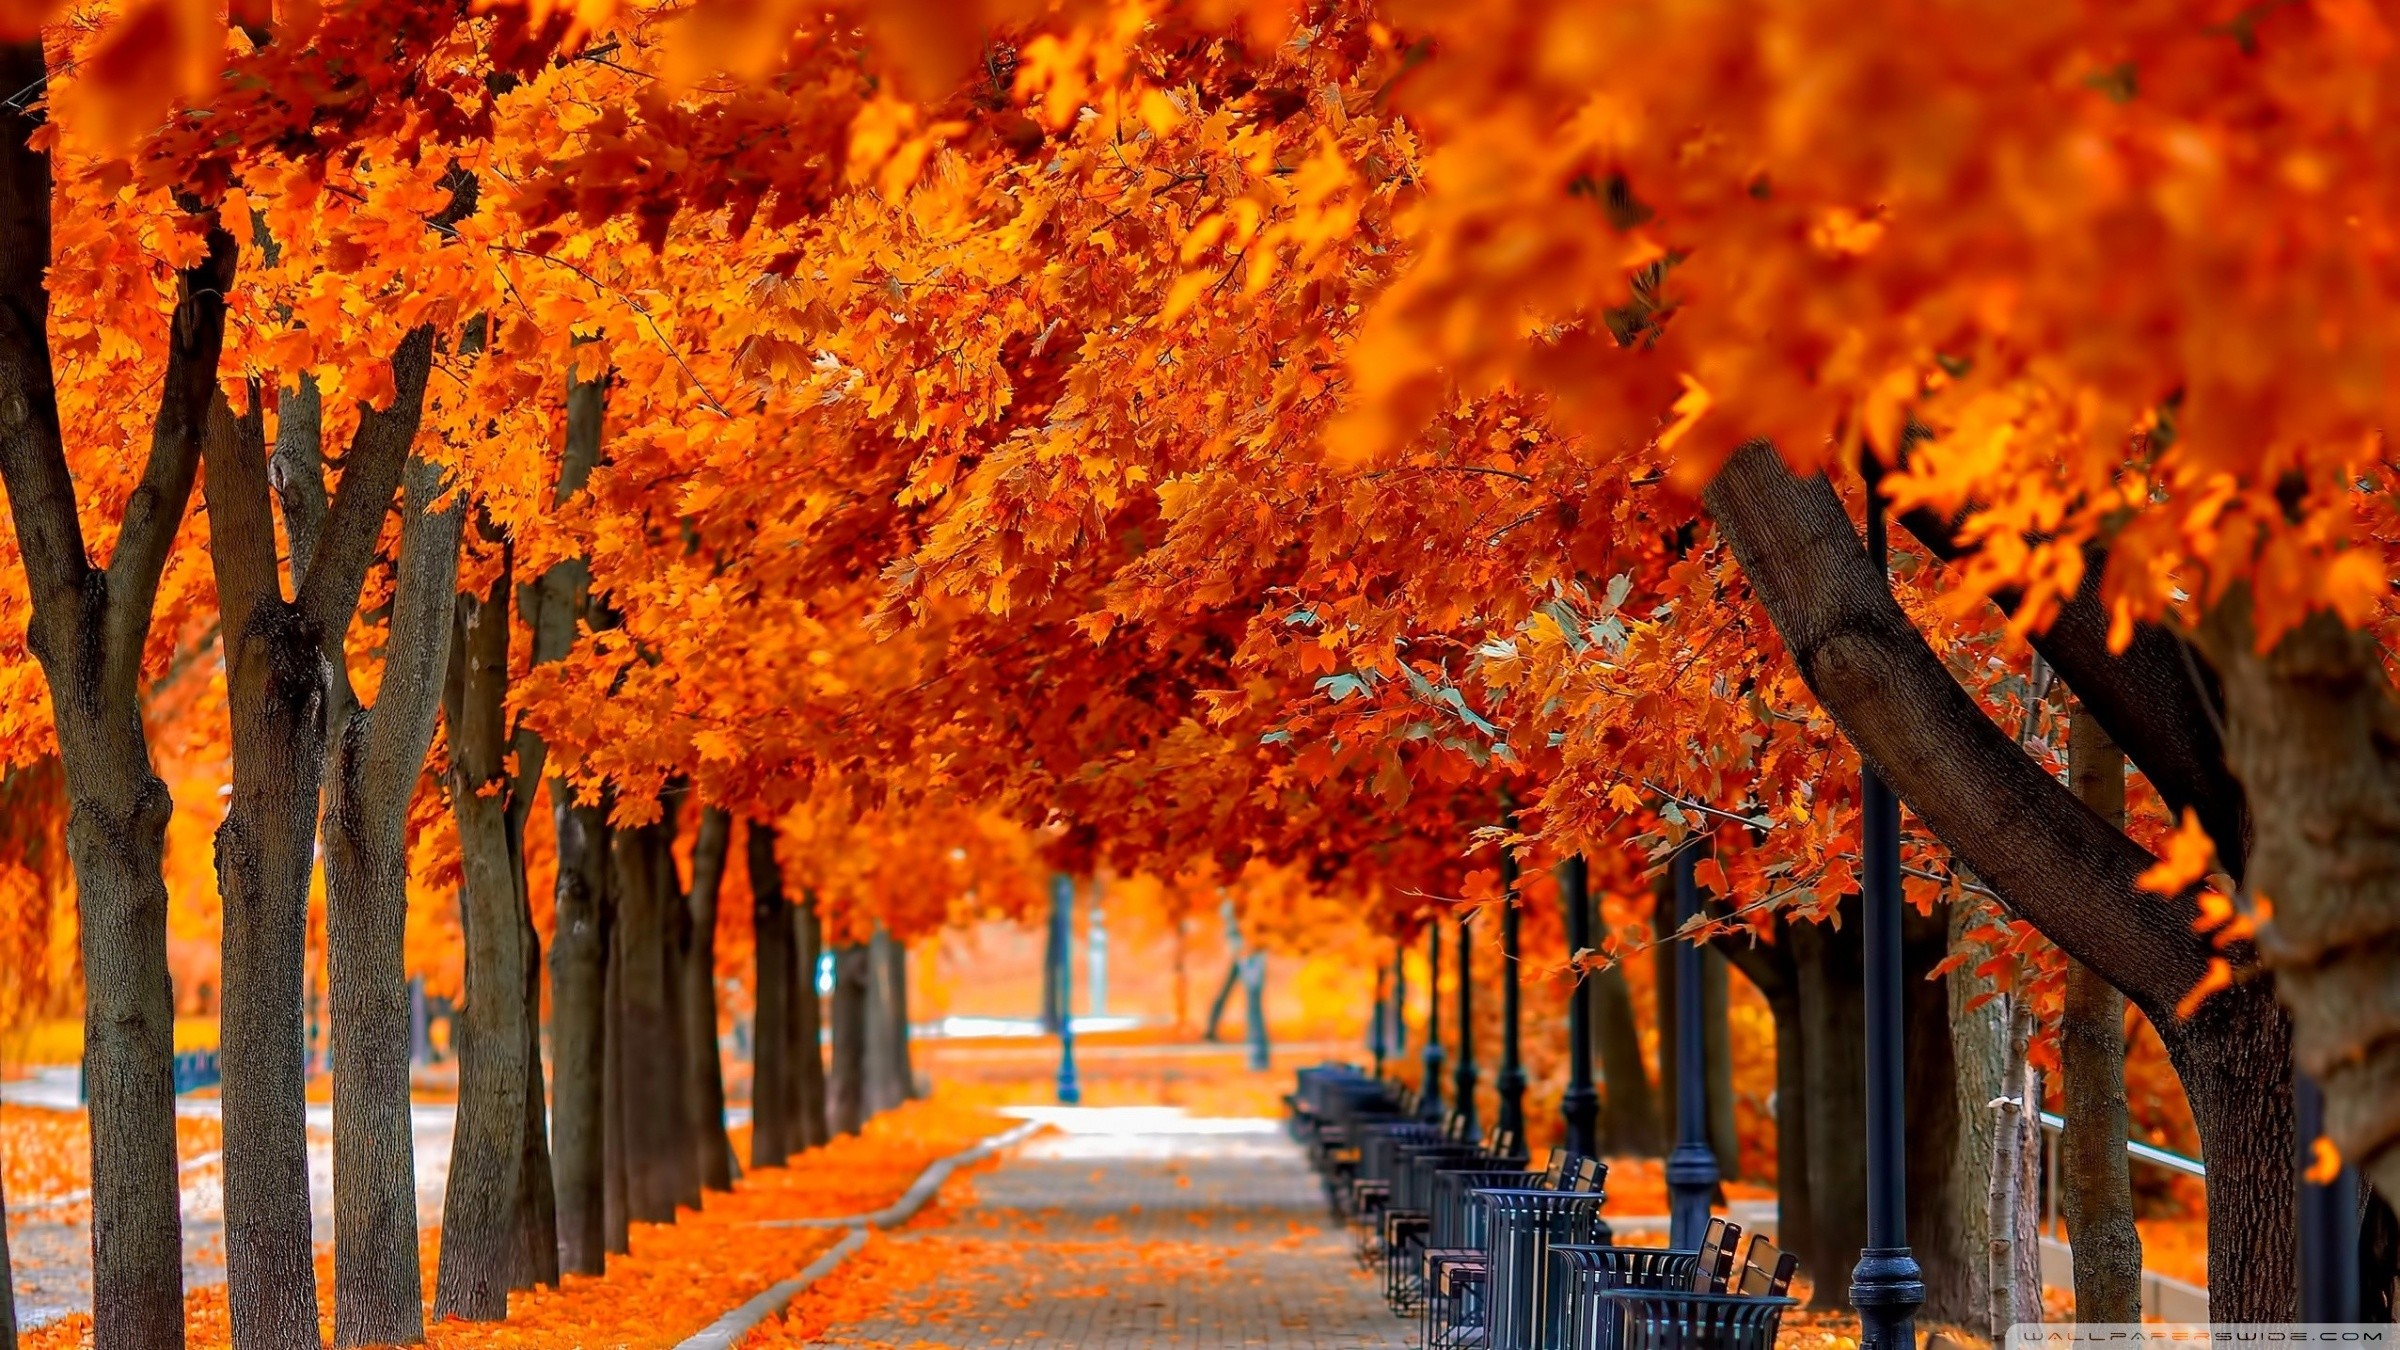 Wallpaper Fall nice hd wallpapers with red and orange colors